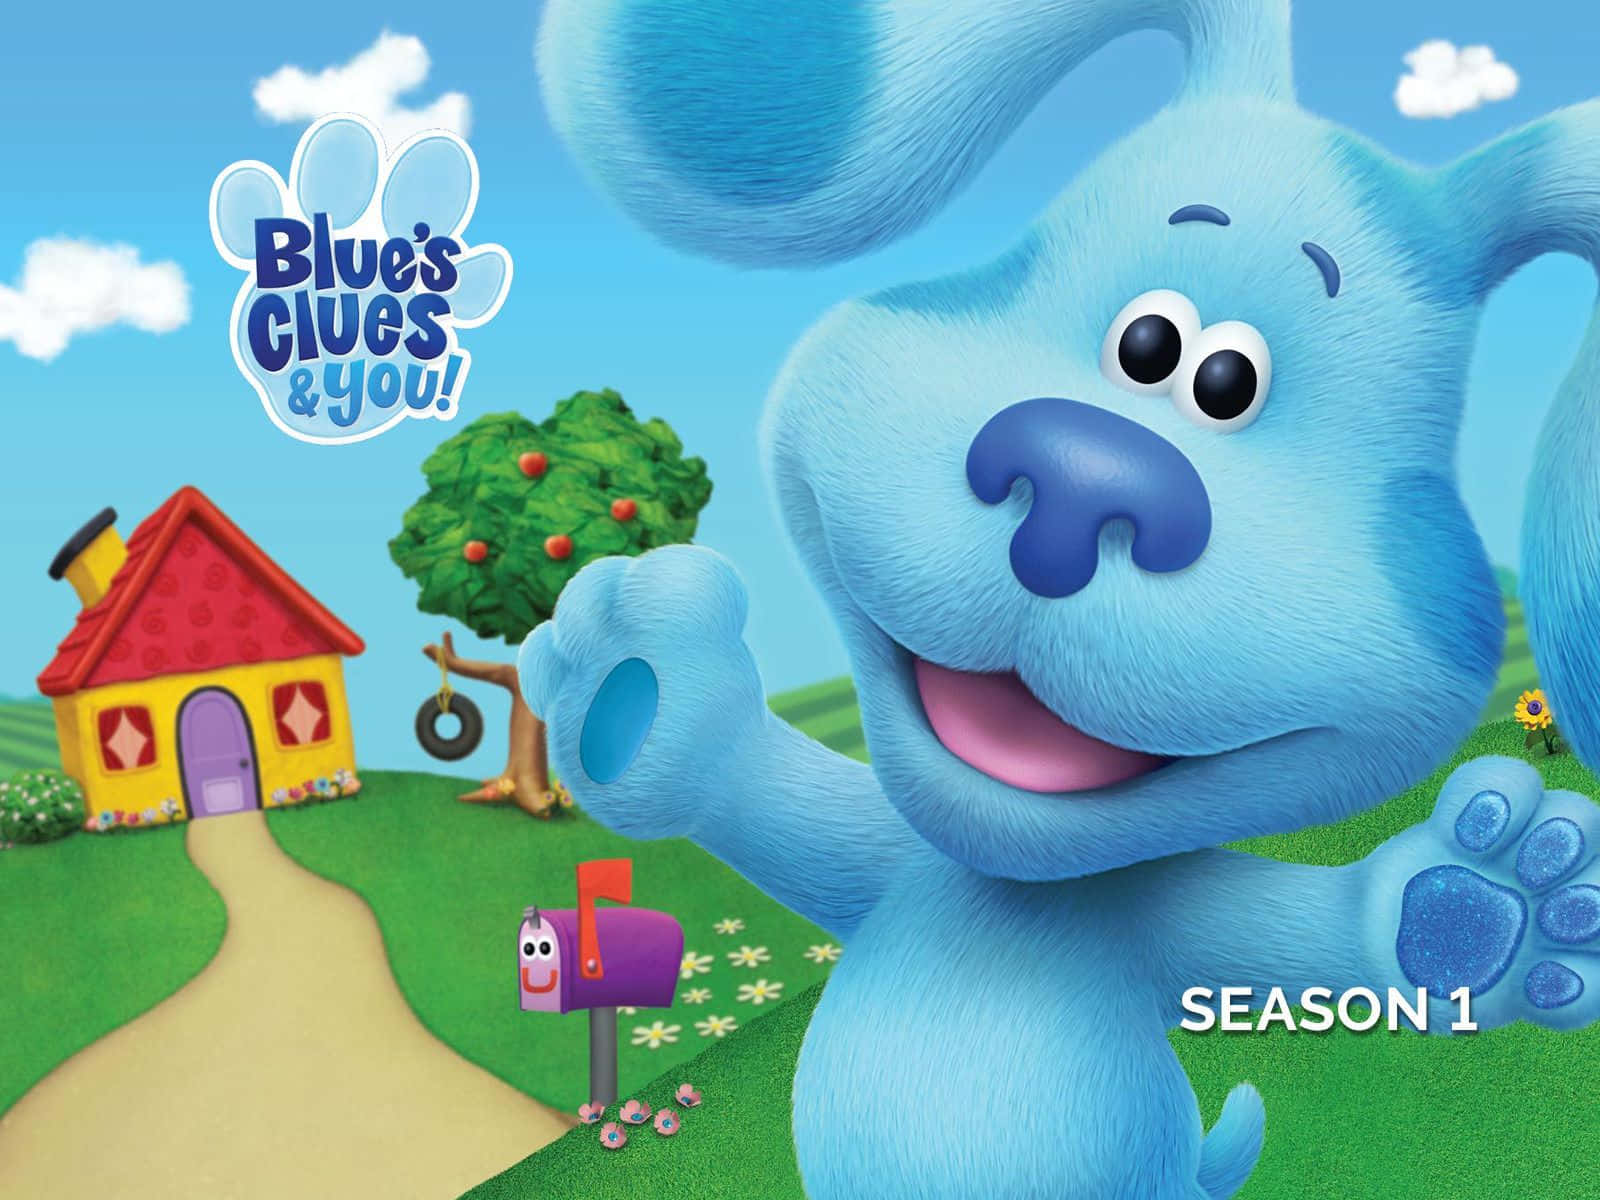 Explore the world of Blue's Clues alongside a beloved host